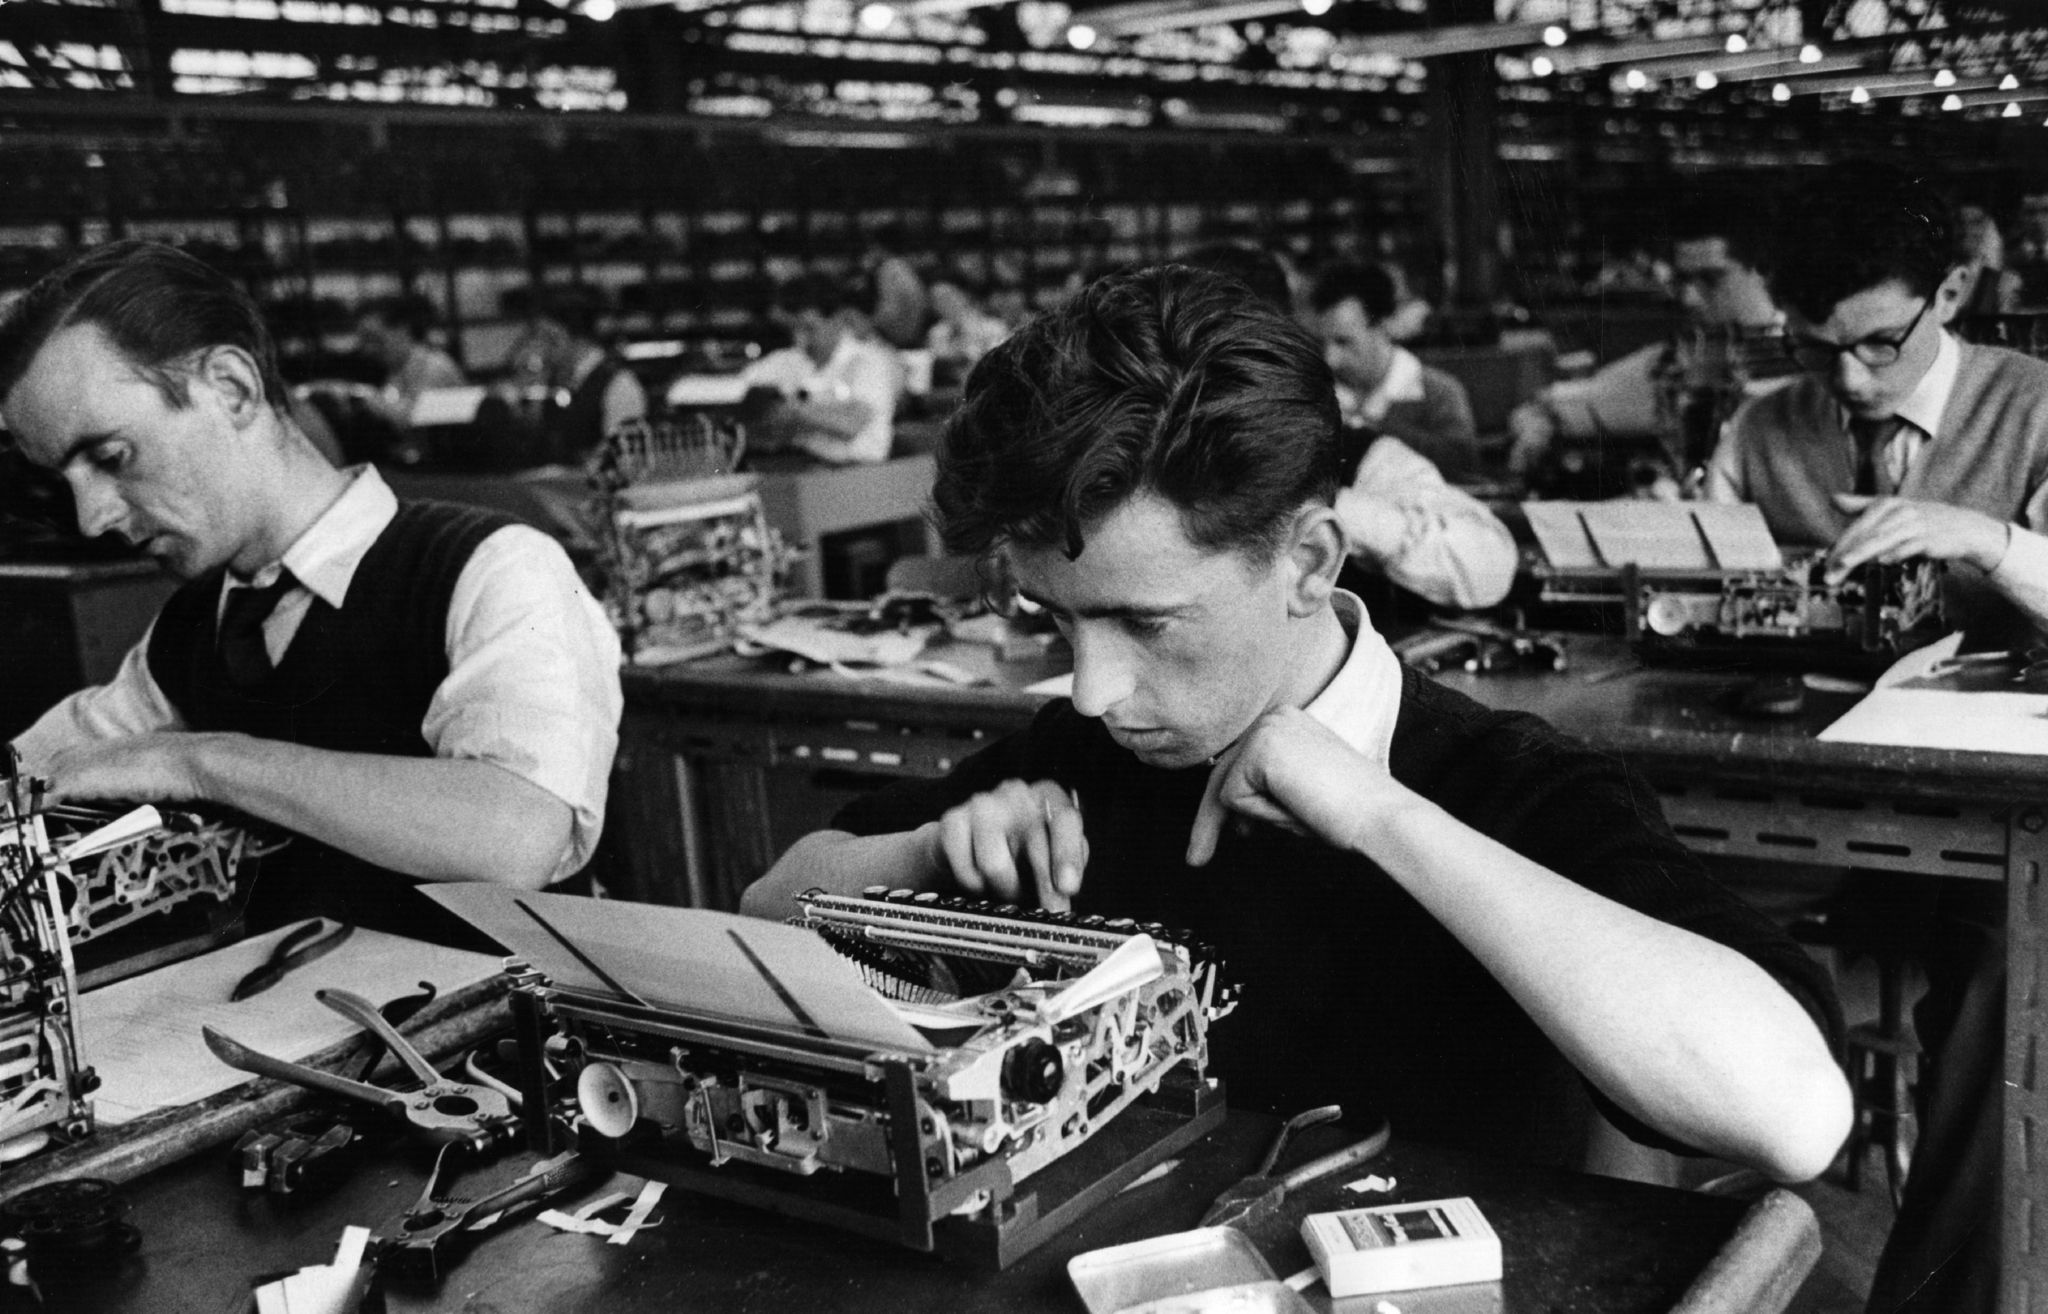 20th August 1955: Employees of British Olivetti Ltd testing typewriters at the company's factory on the Queenslie Industrial Estate in Clydeside, Glasgow. The factory is highly modernised and makes machines primarily for export to Australia, New Zealand and Africa. Original Publication: Picture Post - 7942 - Let Glasgow Flourish! - pub. 1955 (Photo by Haywood Magee/Picture Post/Hulton Archive/Getty Images)